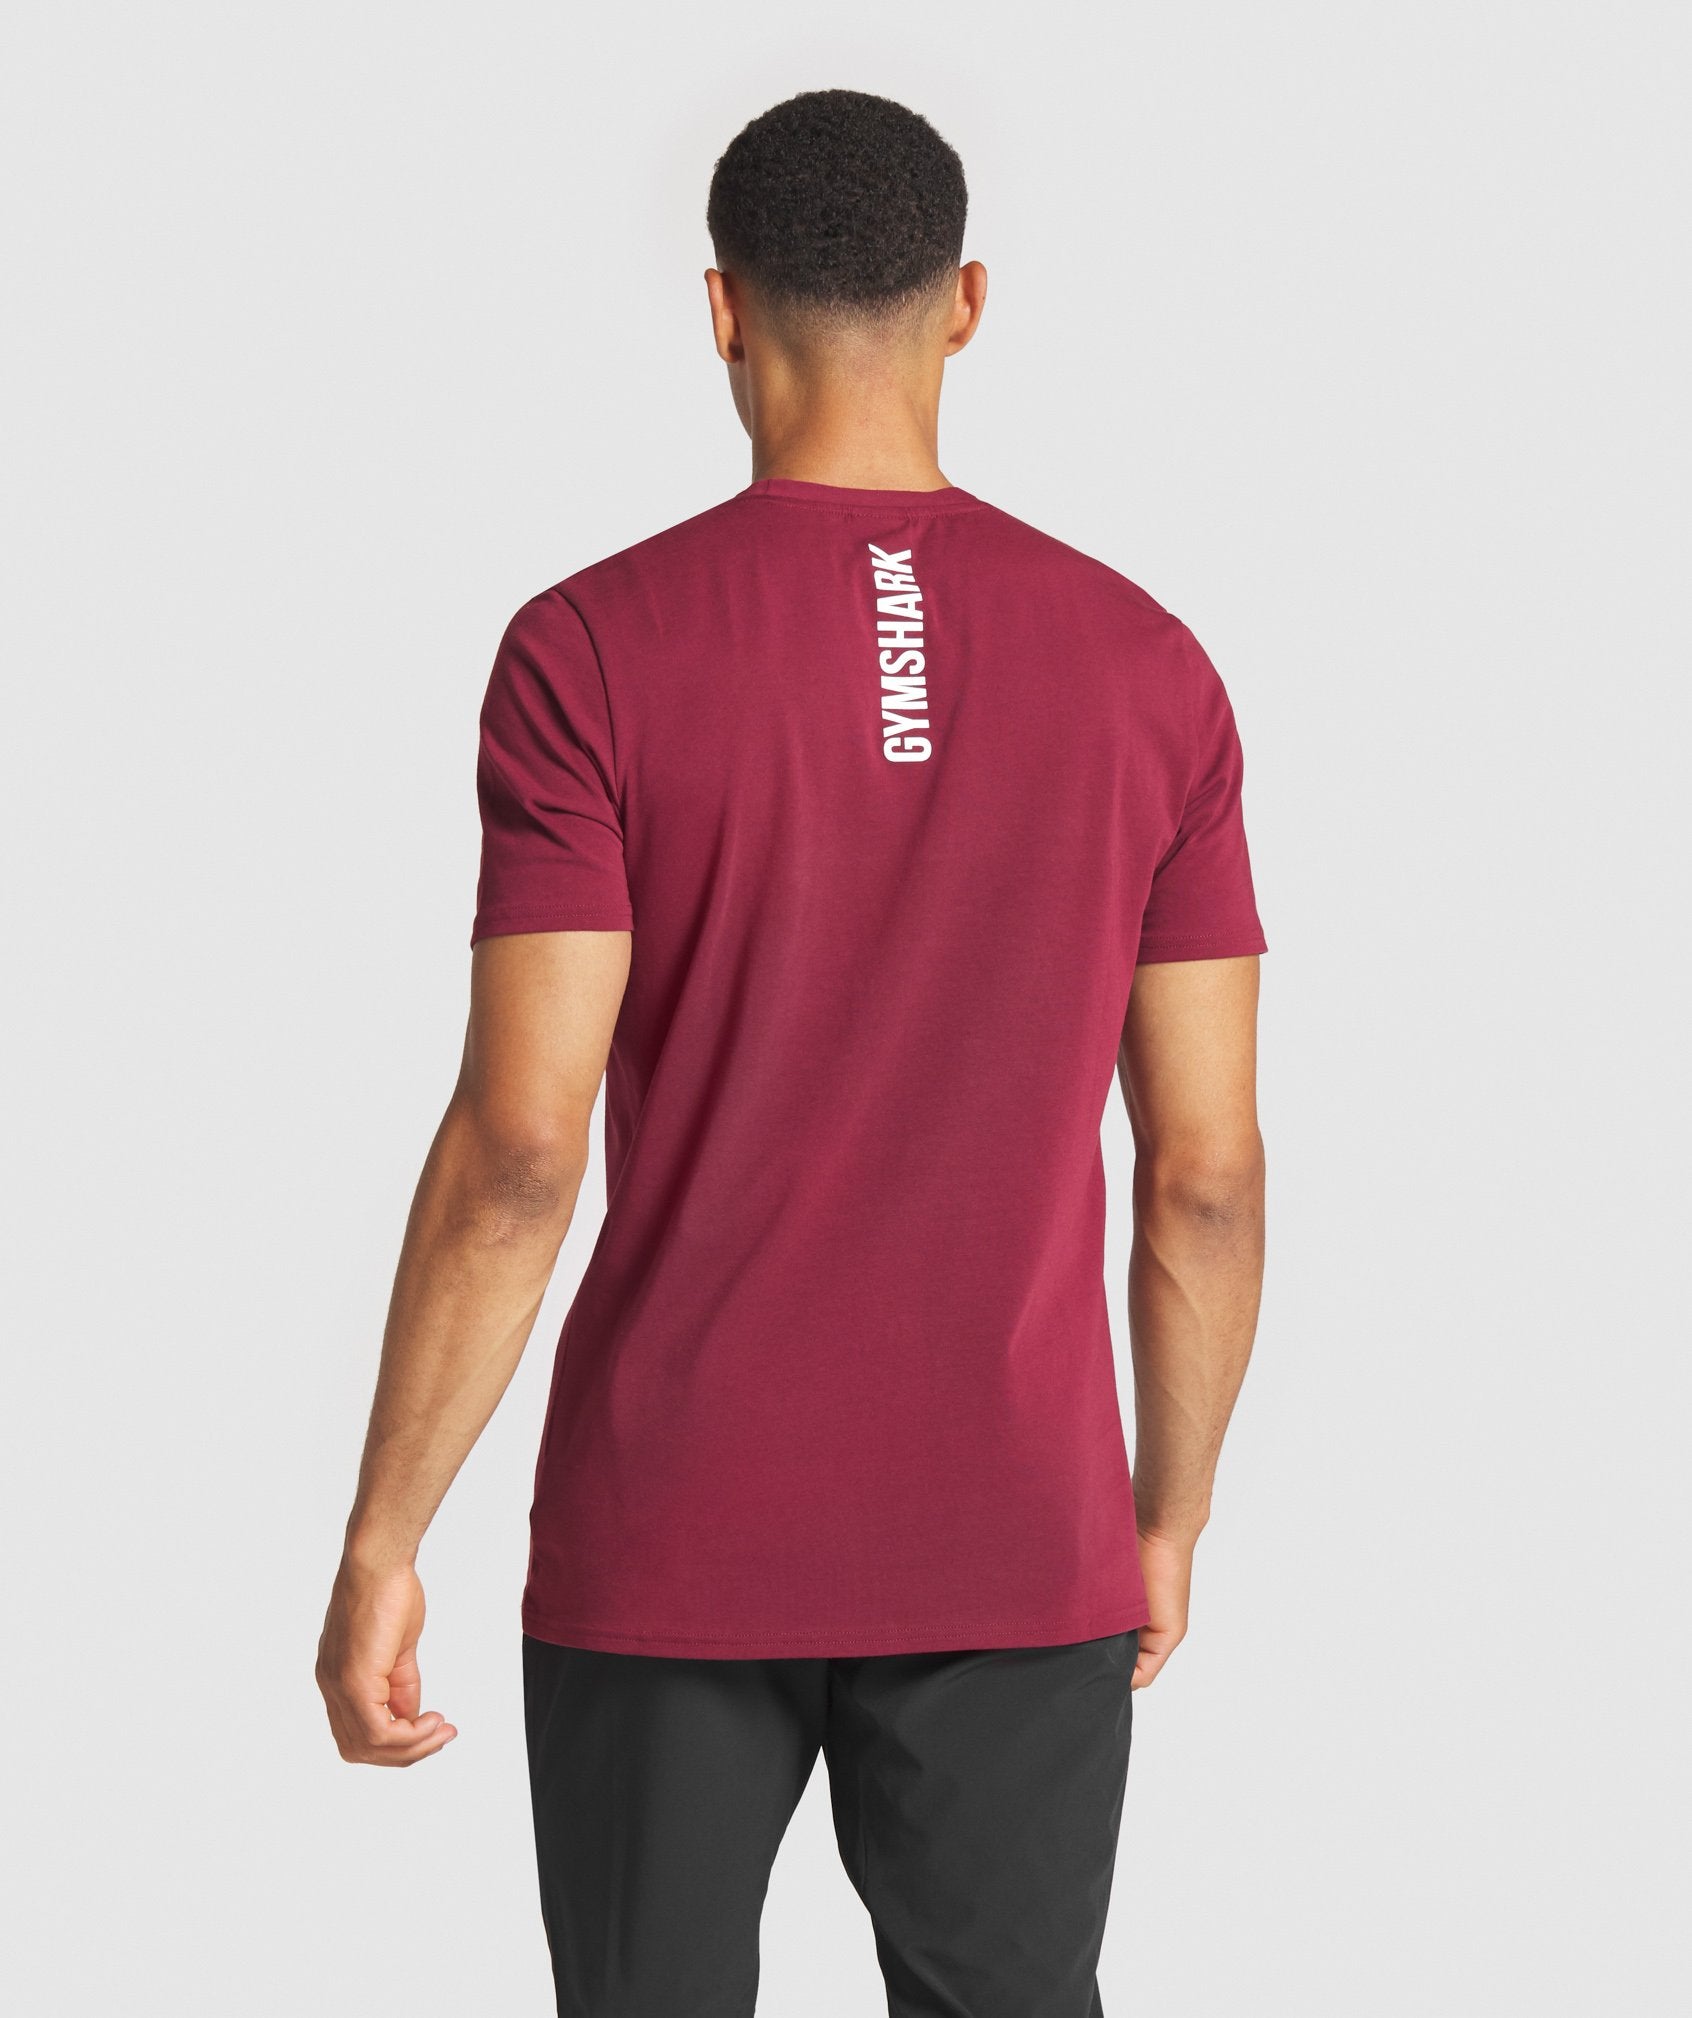 Graphic Infill T-Shirt in Claret